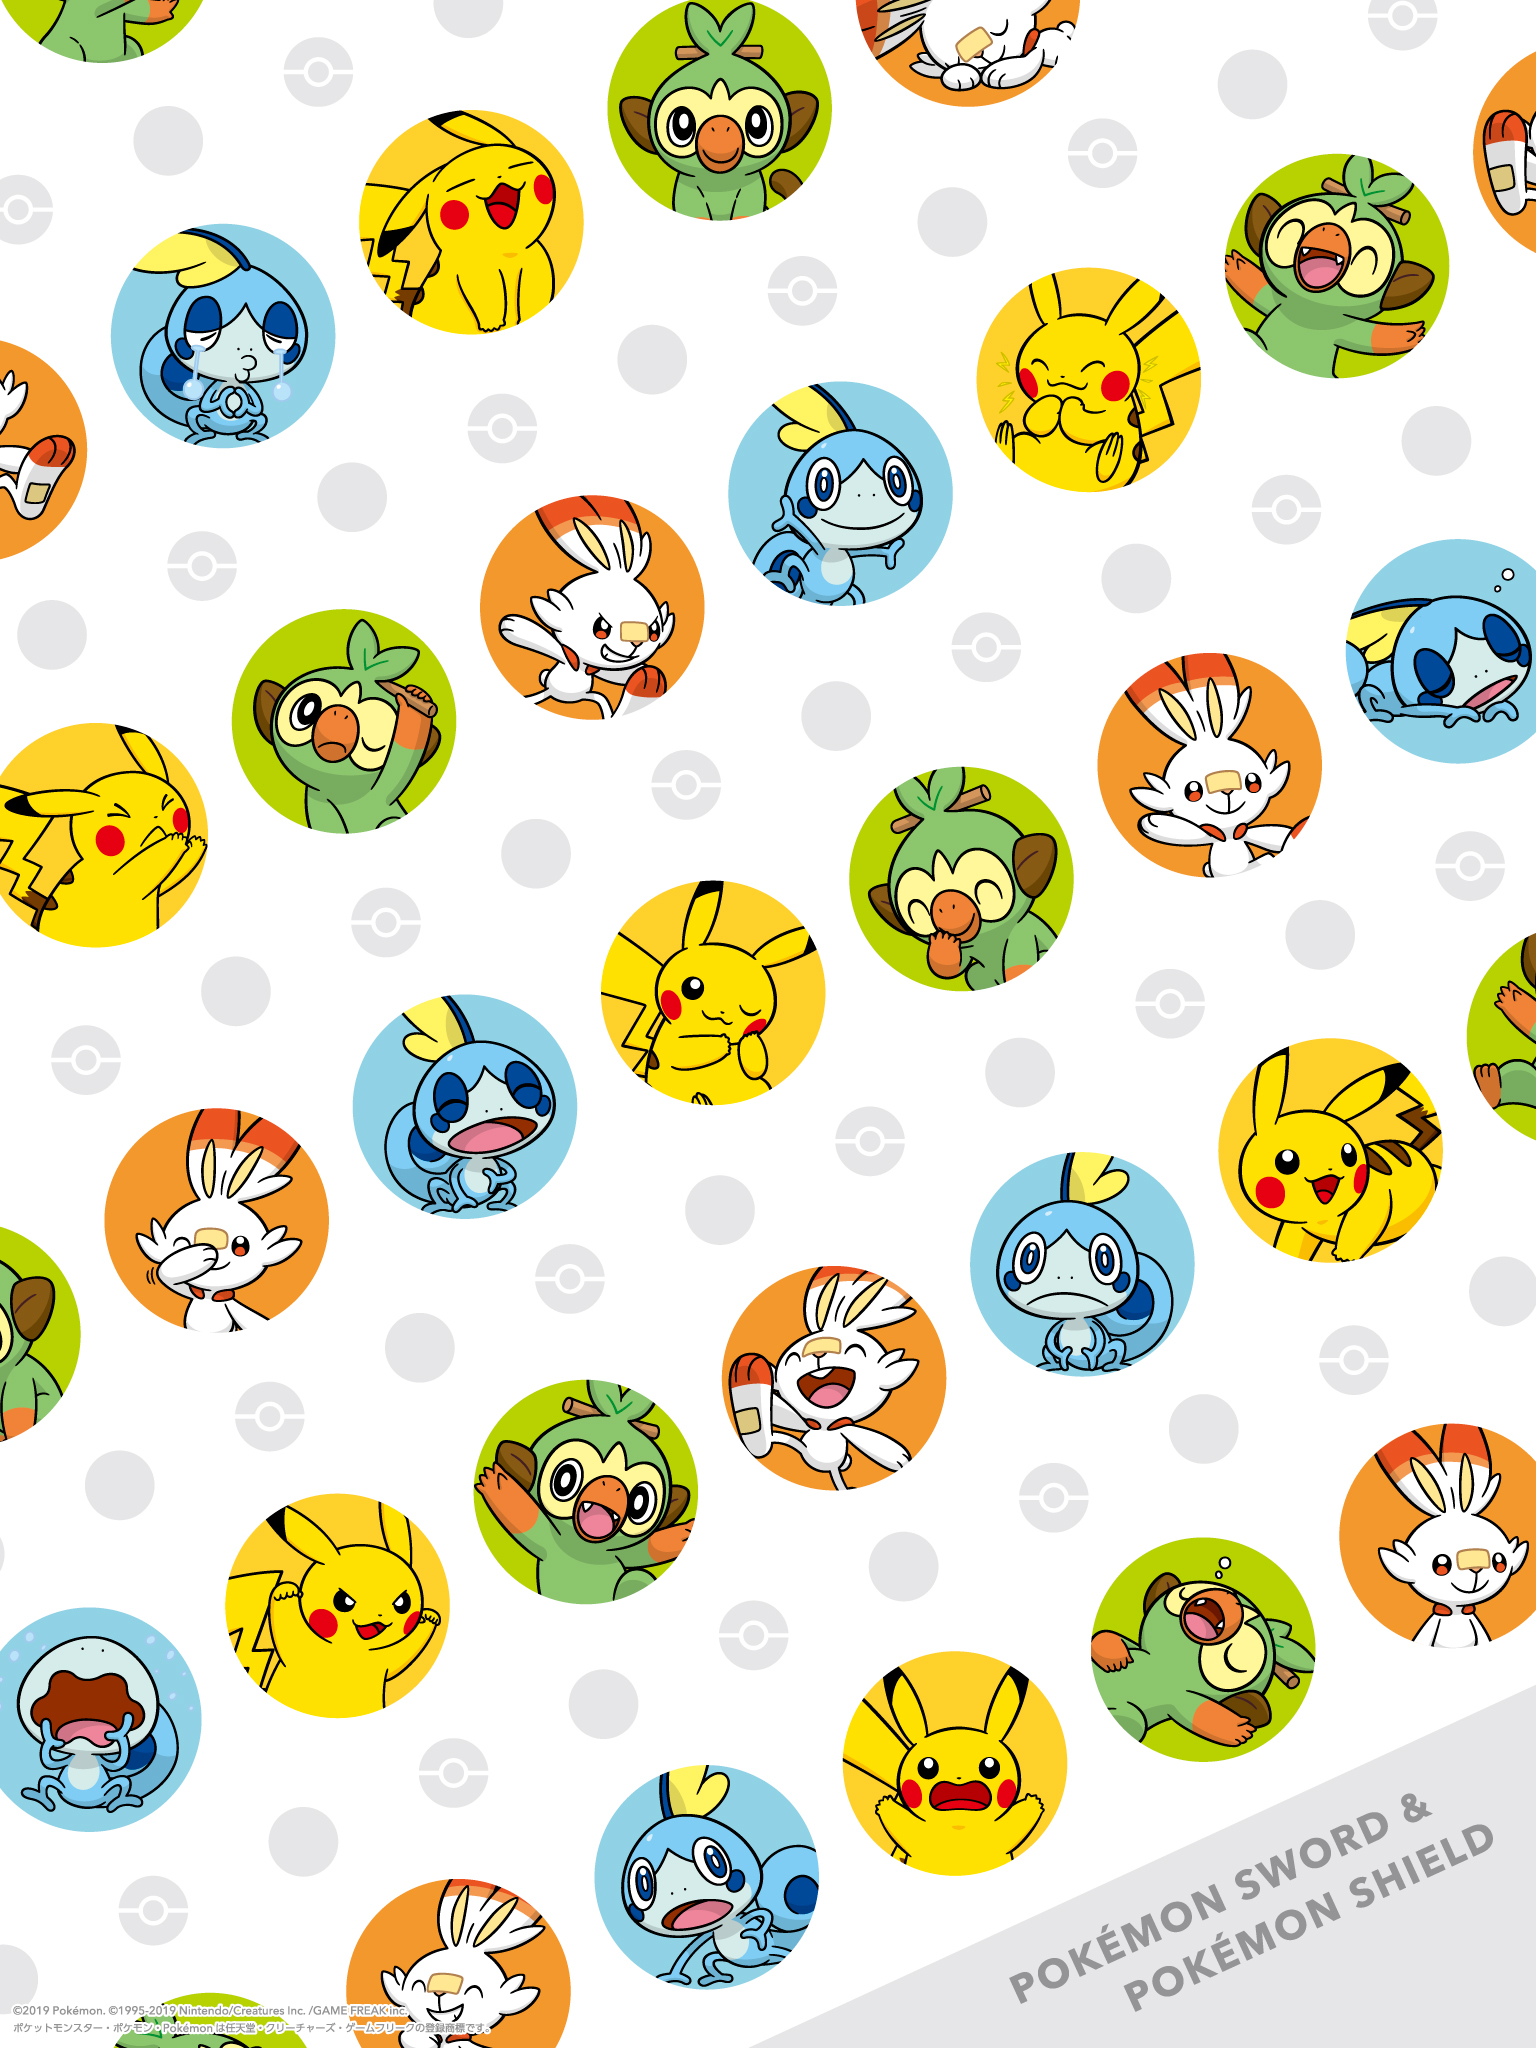 Download This Free Pokemon Sword And Shield Wallpaper Featuring The Galar  Starters – NintendoSoup